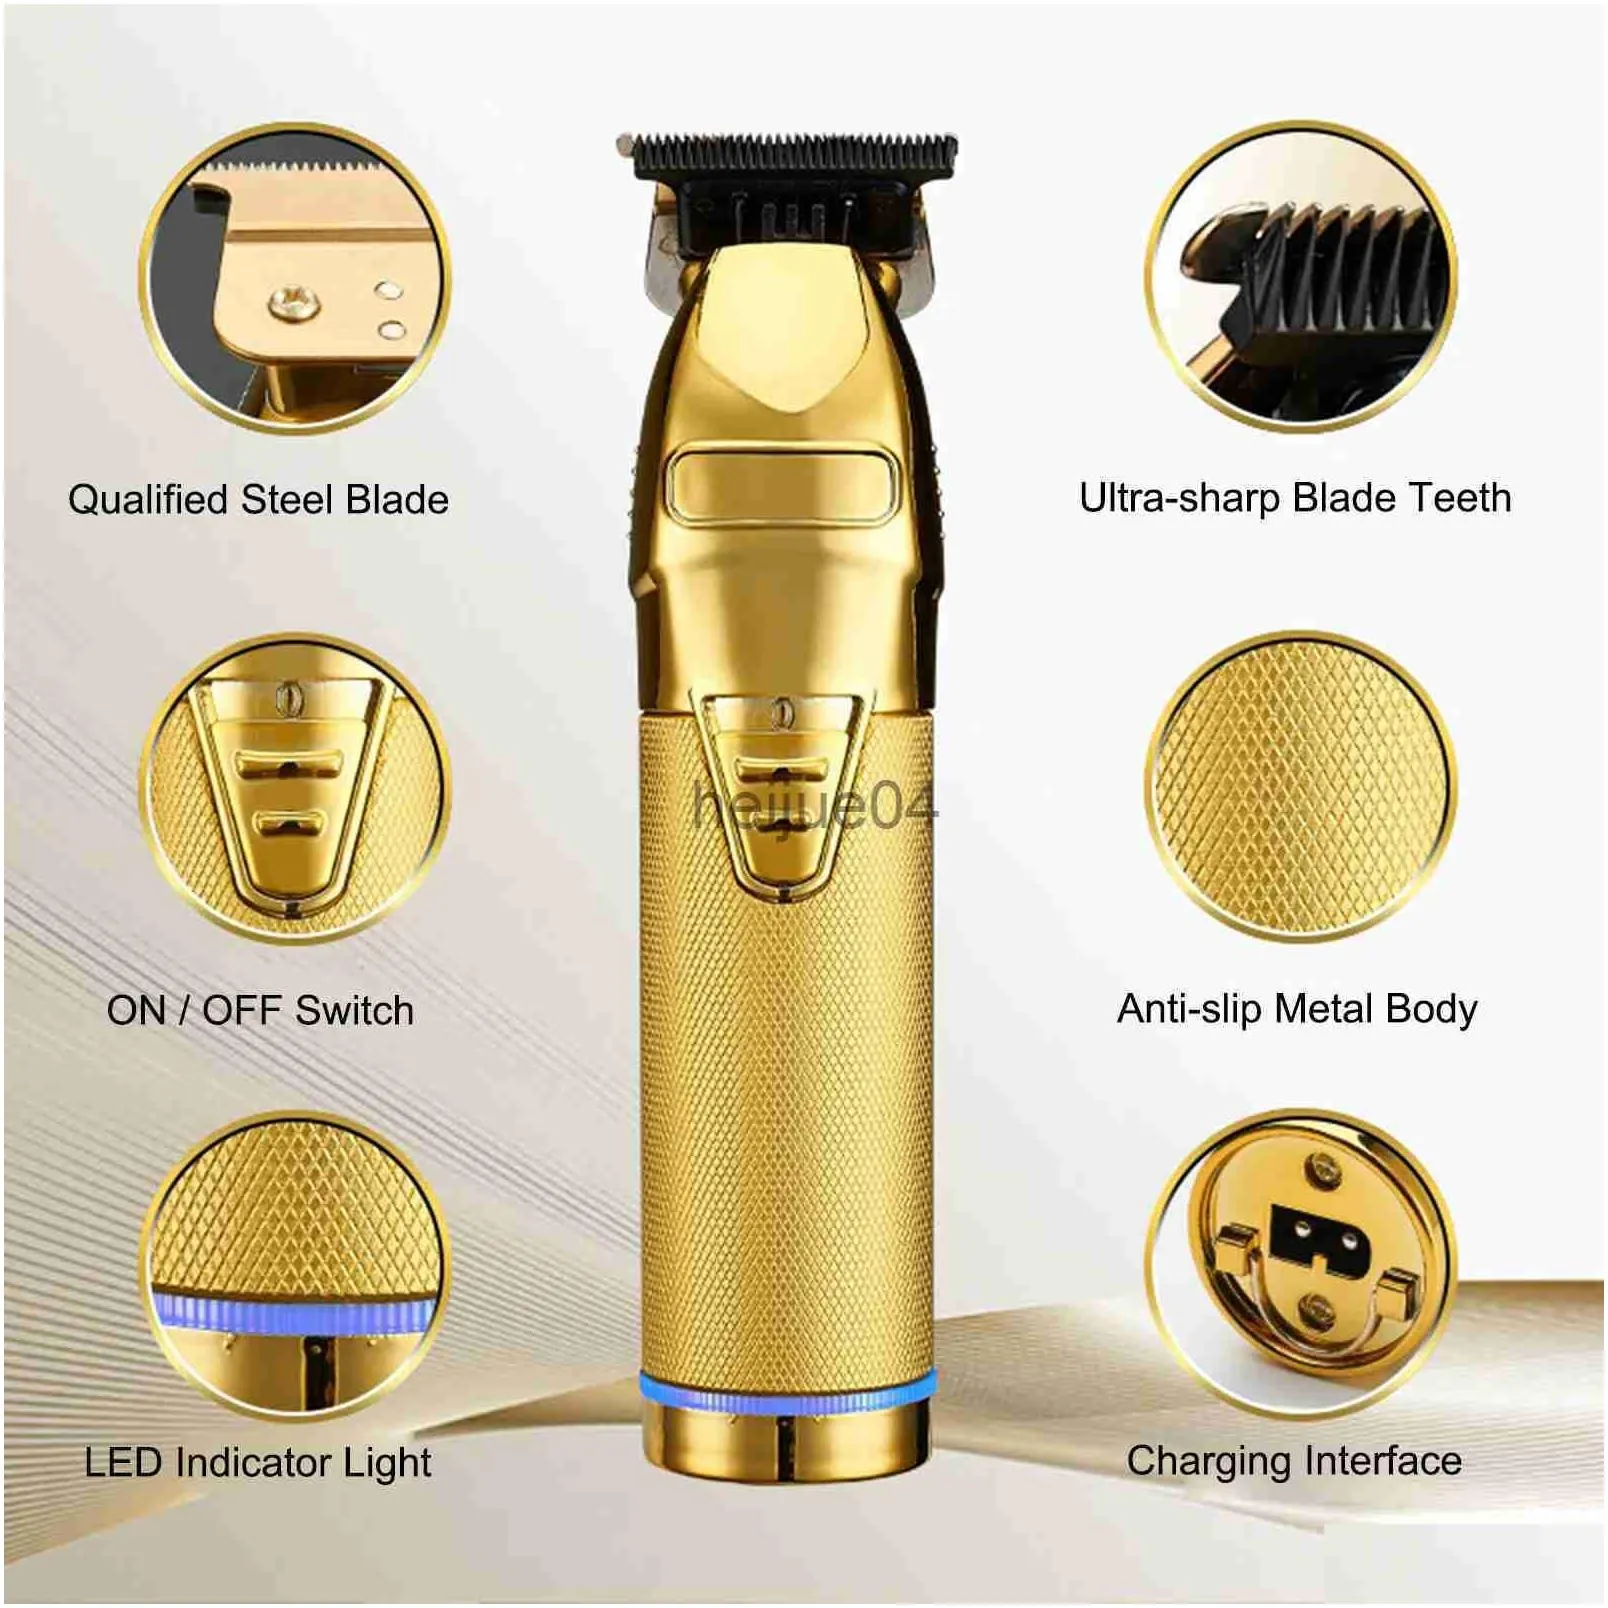 Clippers & Trimmers Clippers Trimmers Hair With Guide Combs Men Cordless Cutting Trimmer Kit Electric Haircut Beard Barber Styling Too Dhtot